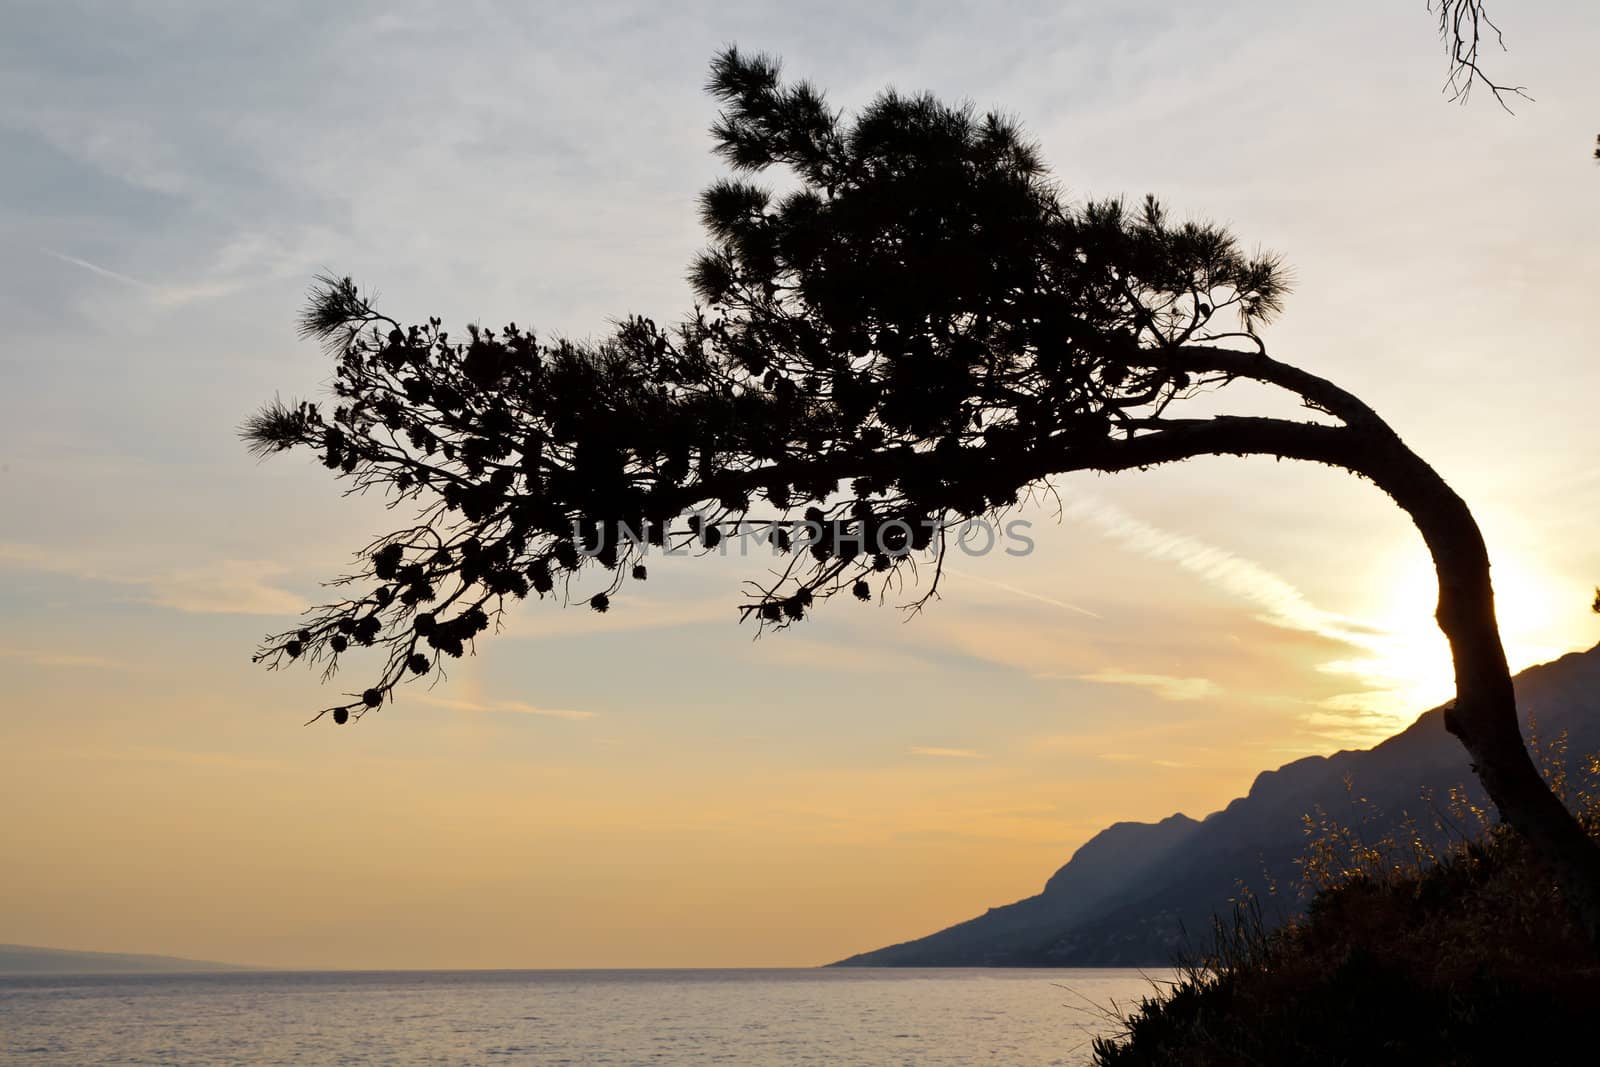 Pine Tree at the Sunset in Croatia by anshar